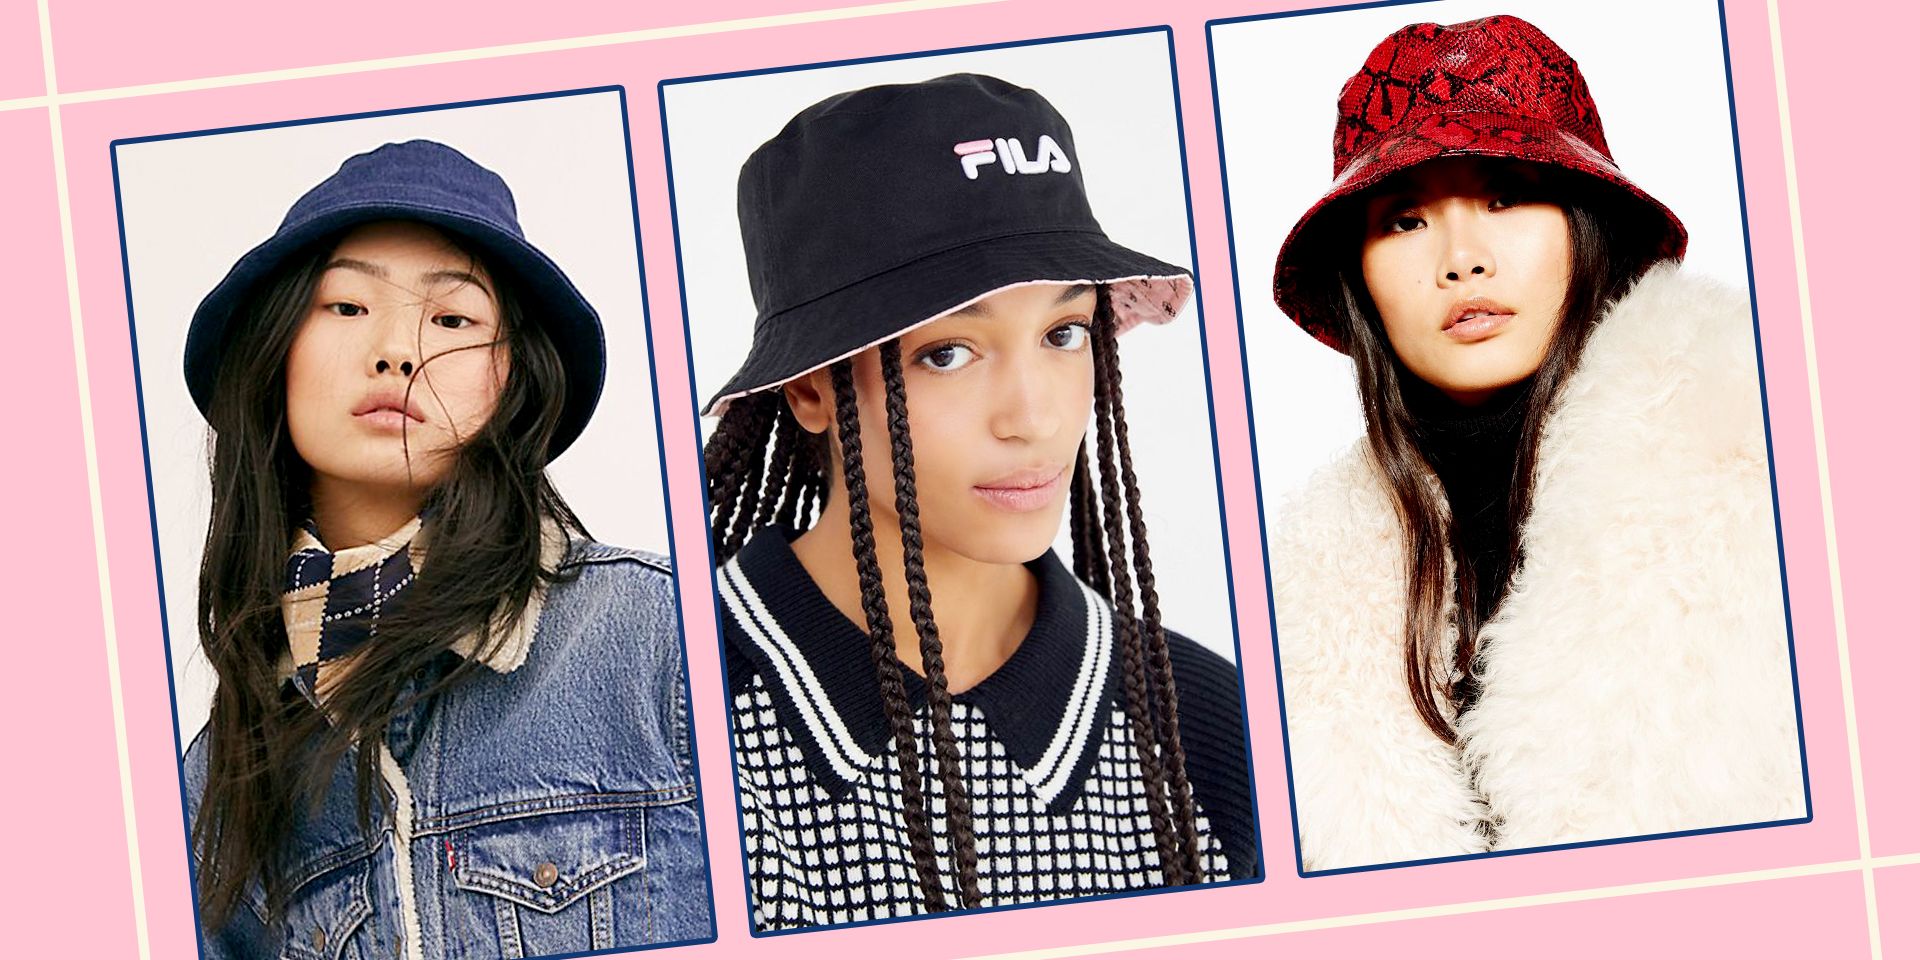 Why is bucket hat so popular?